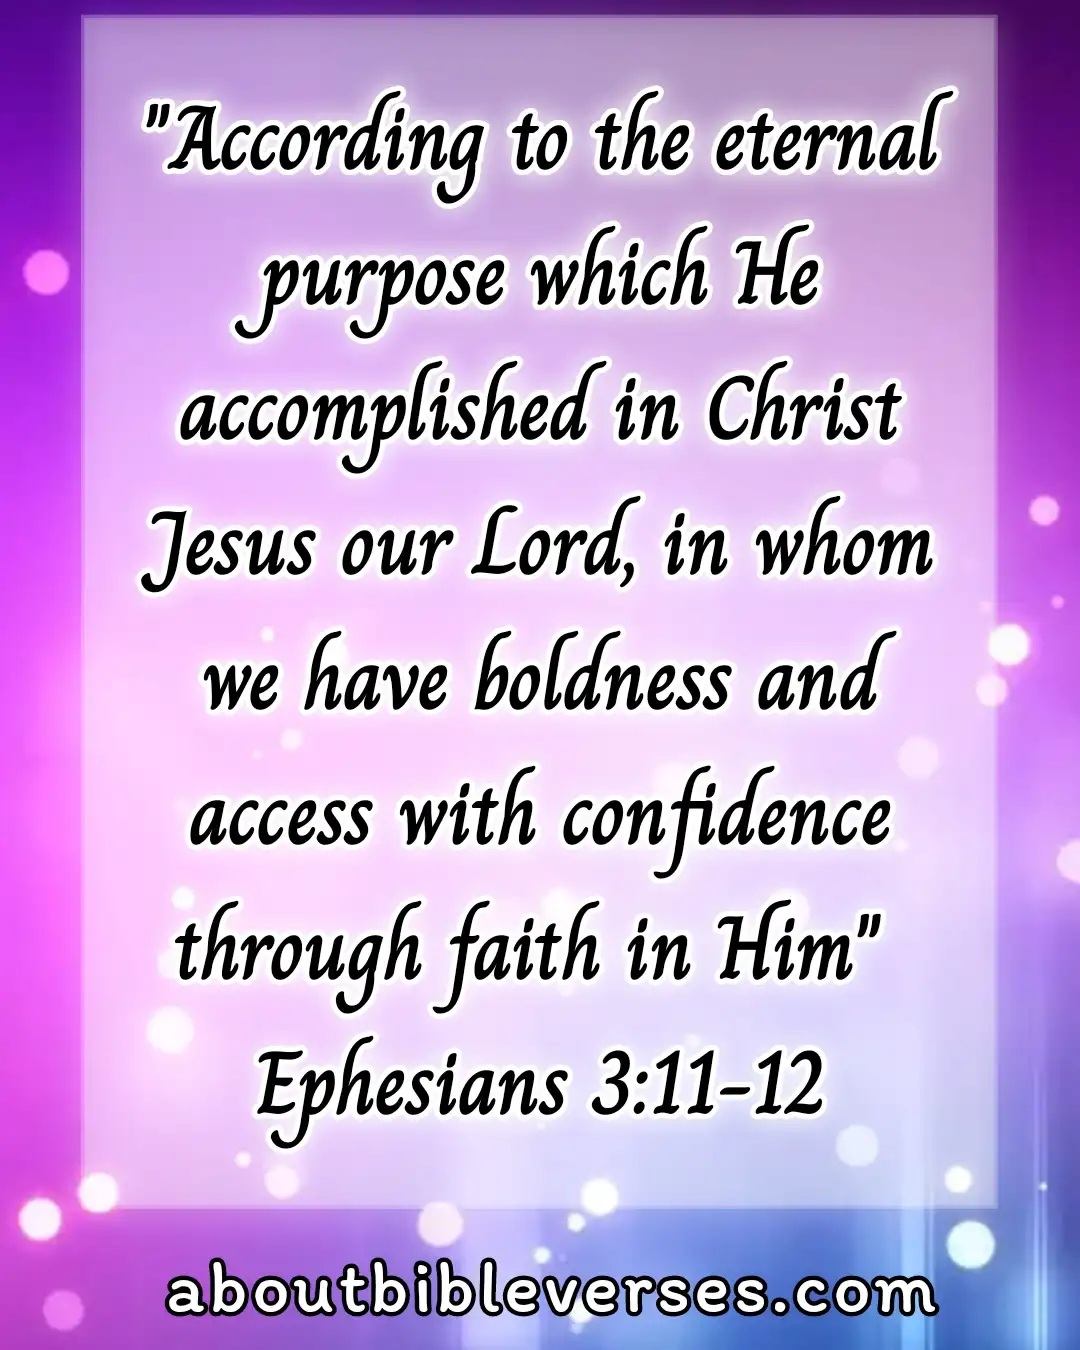 Bible Verses About Boldness (Ephesians 3:11-12)